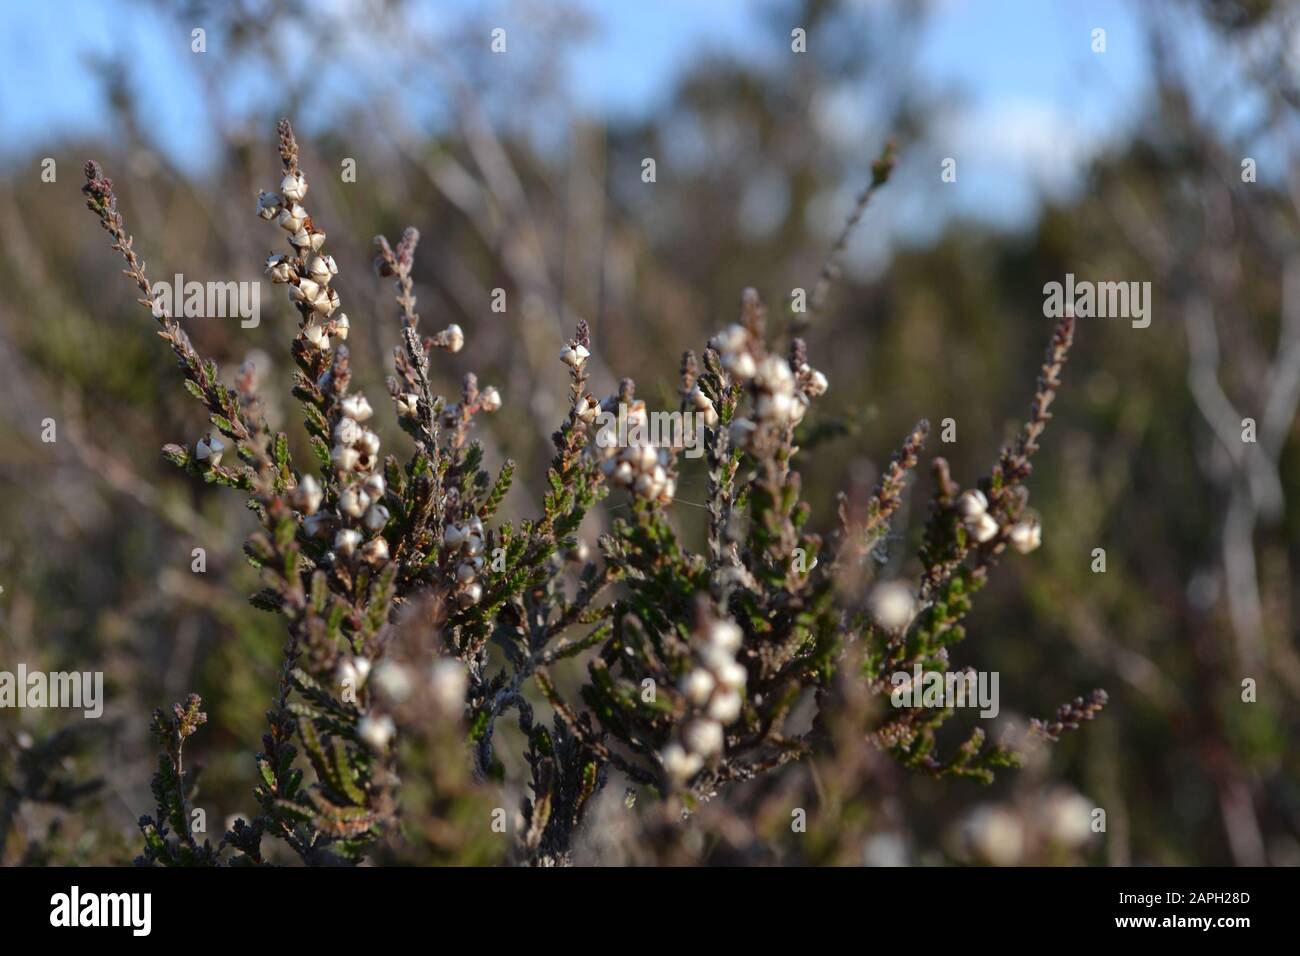 The pretty, delicate white or light pink flowers and rough green, brown and purple leaves on a sprig of heather or ling (Calluna vulgaris) growing wil Stock Photo